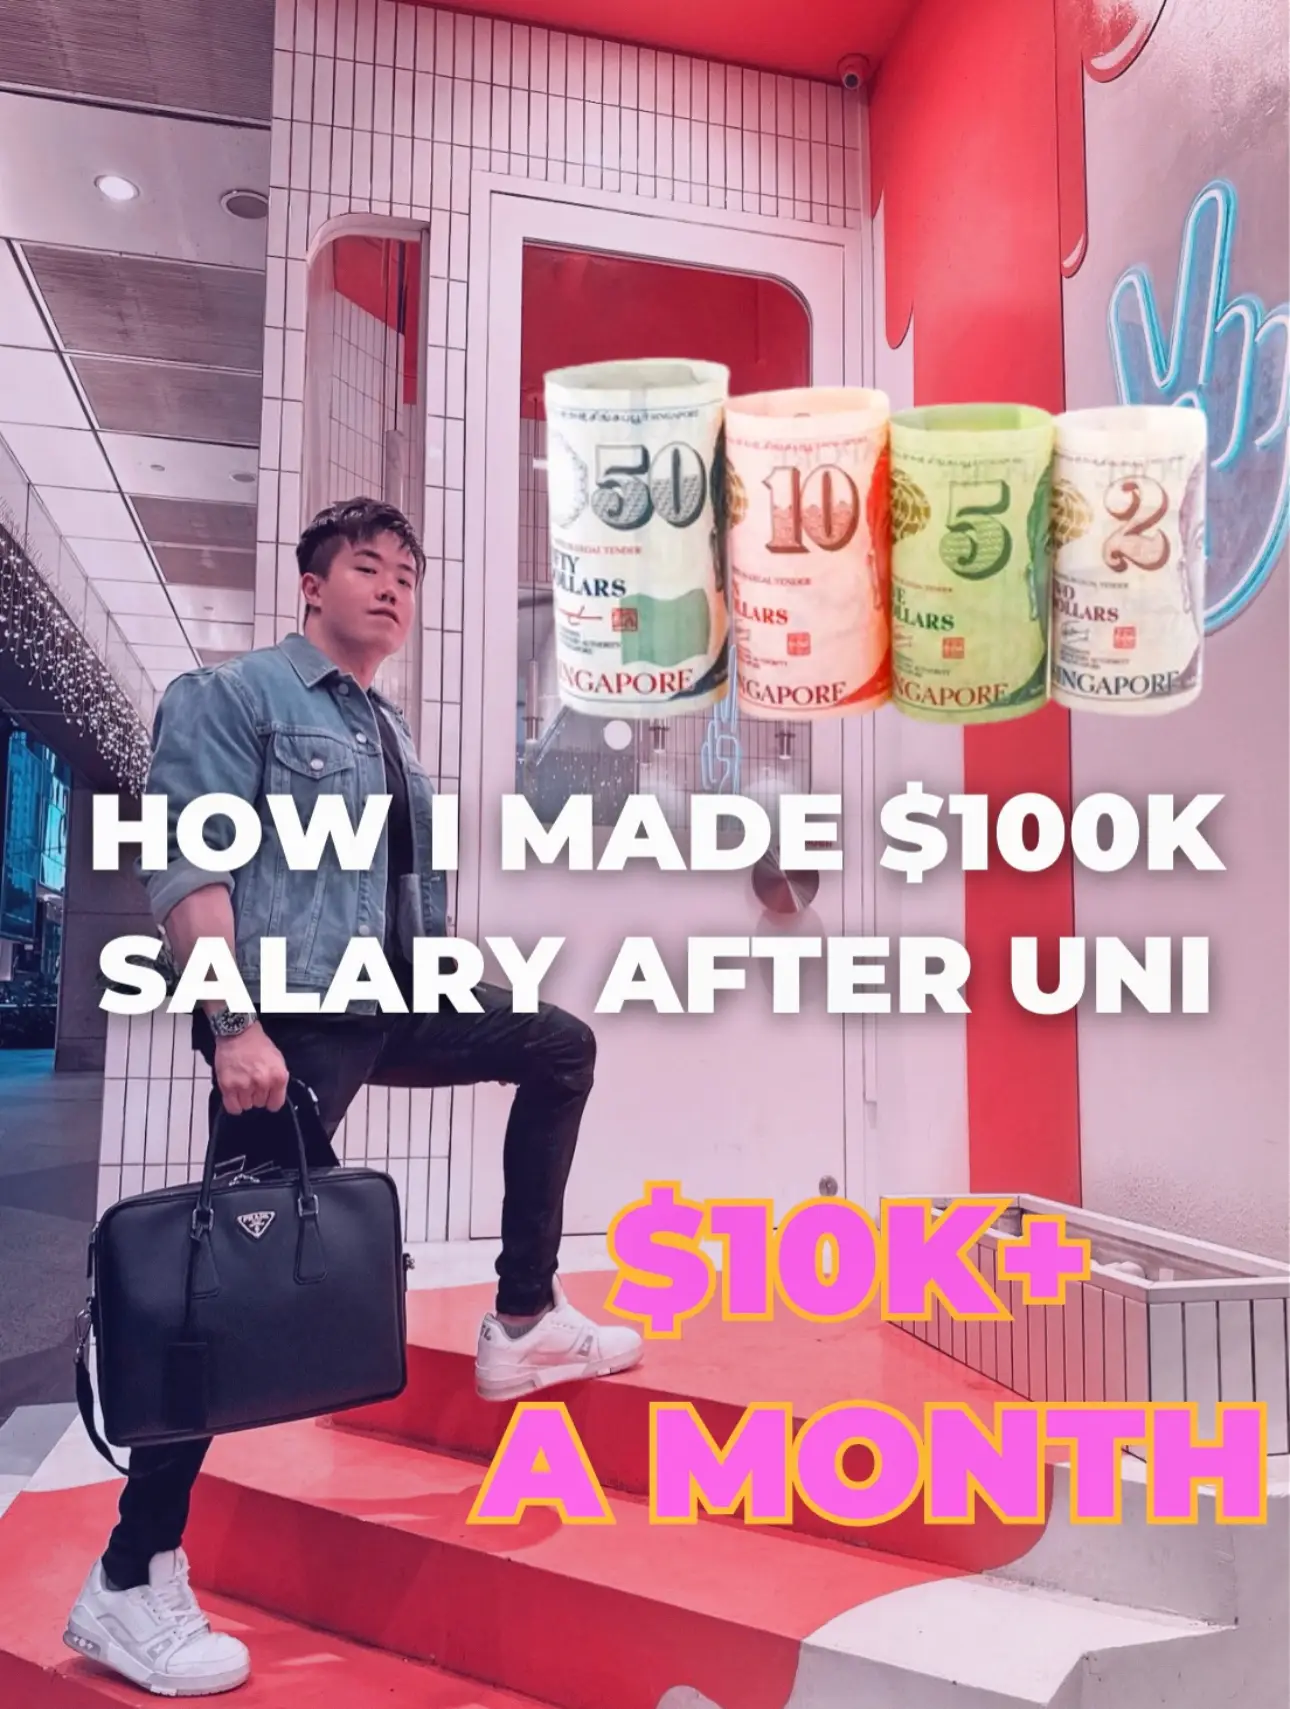 How I went from $42K to $100K after graduation 🎓👨🏻‍🎓's images(0)